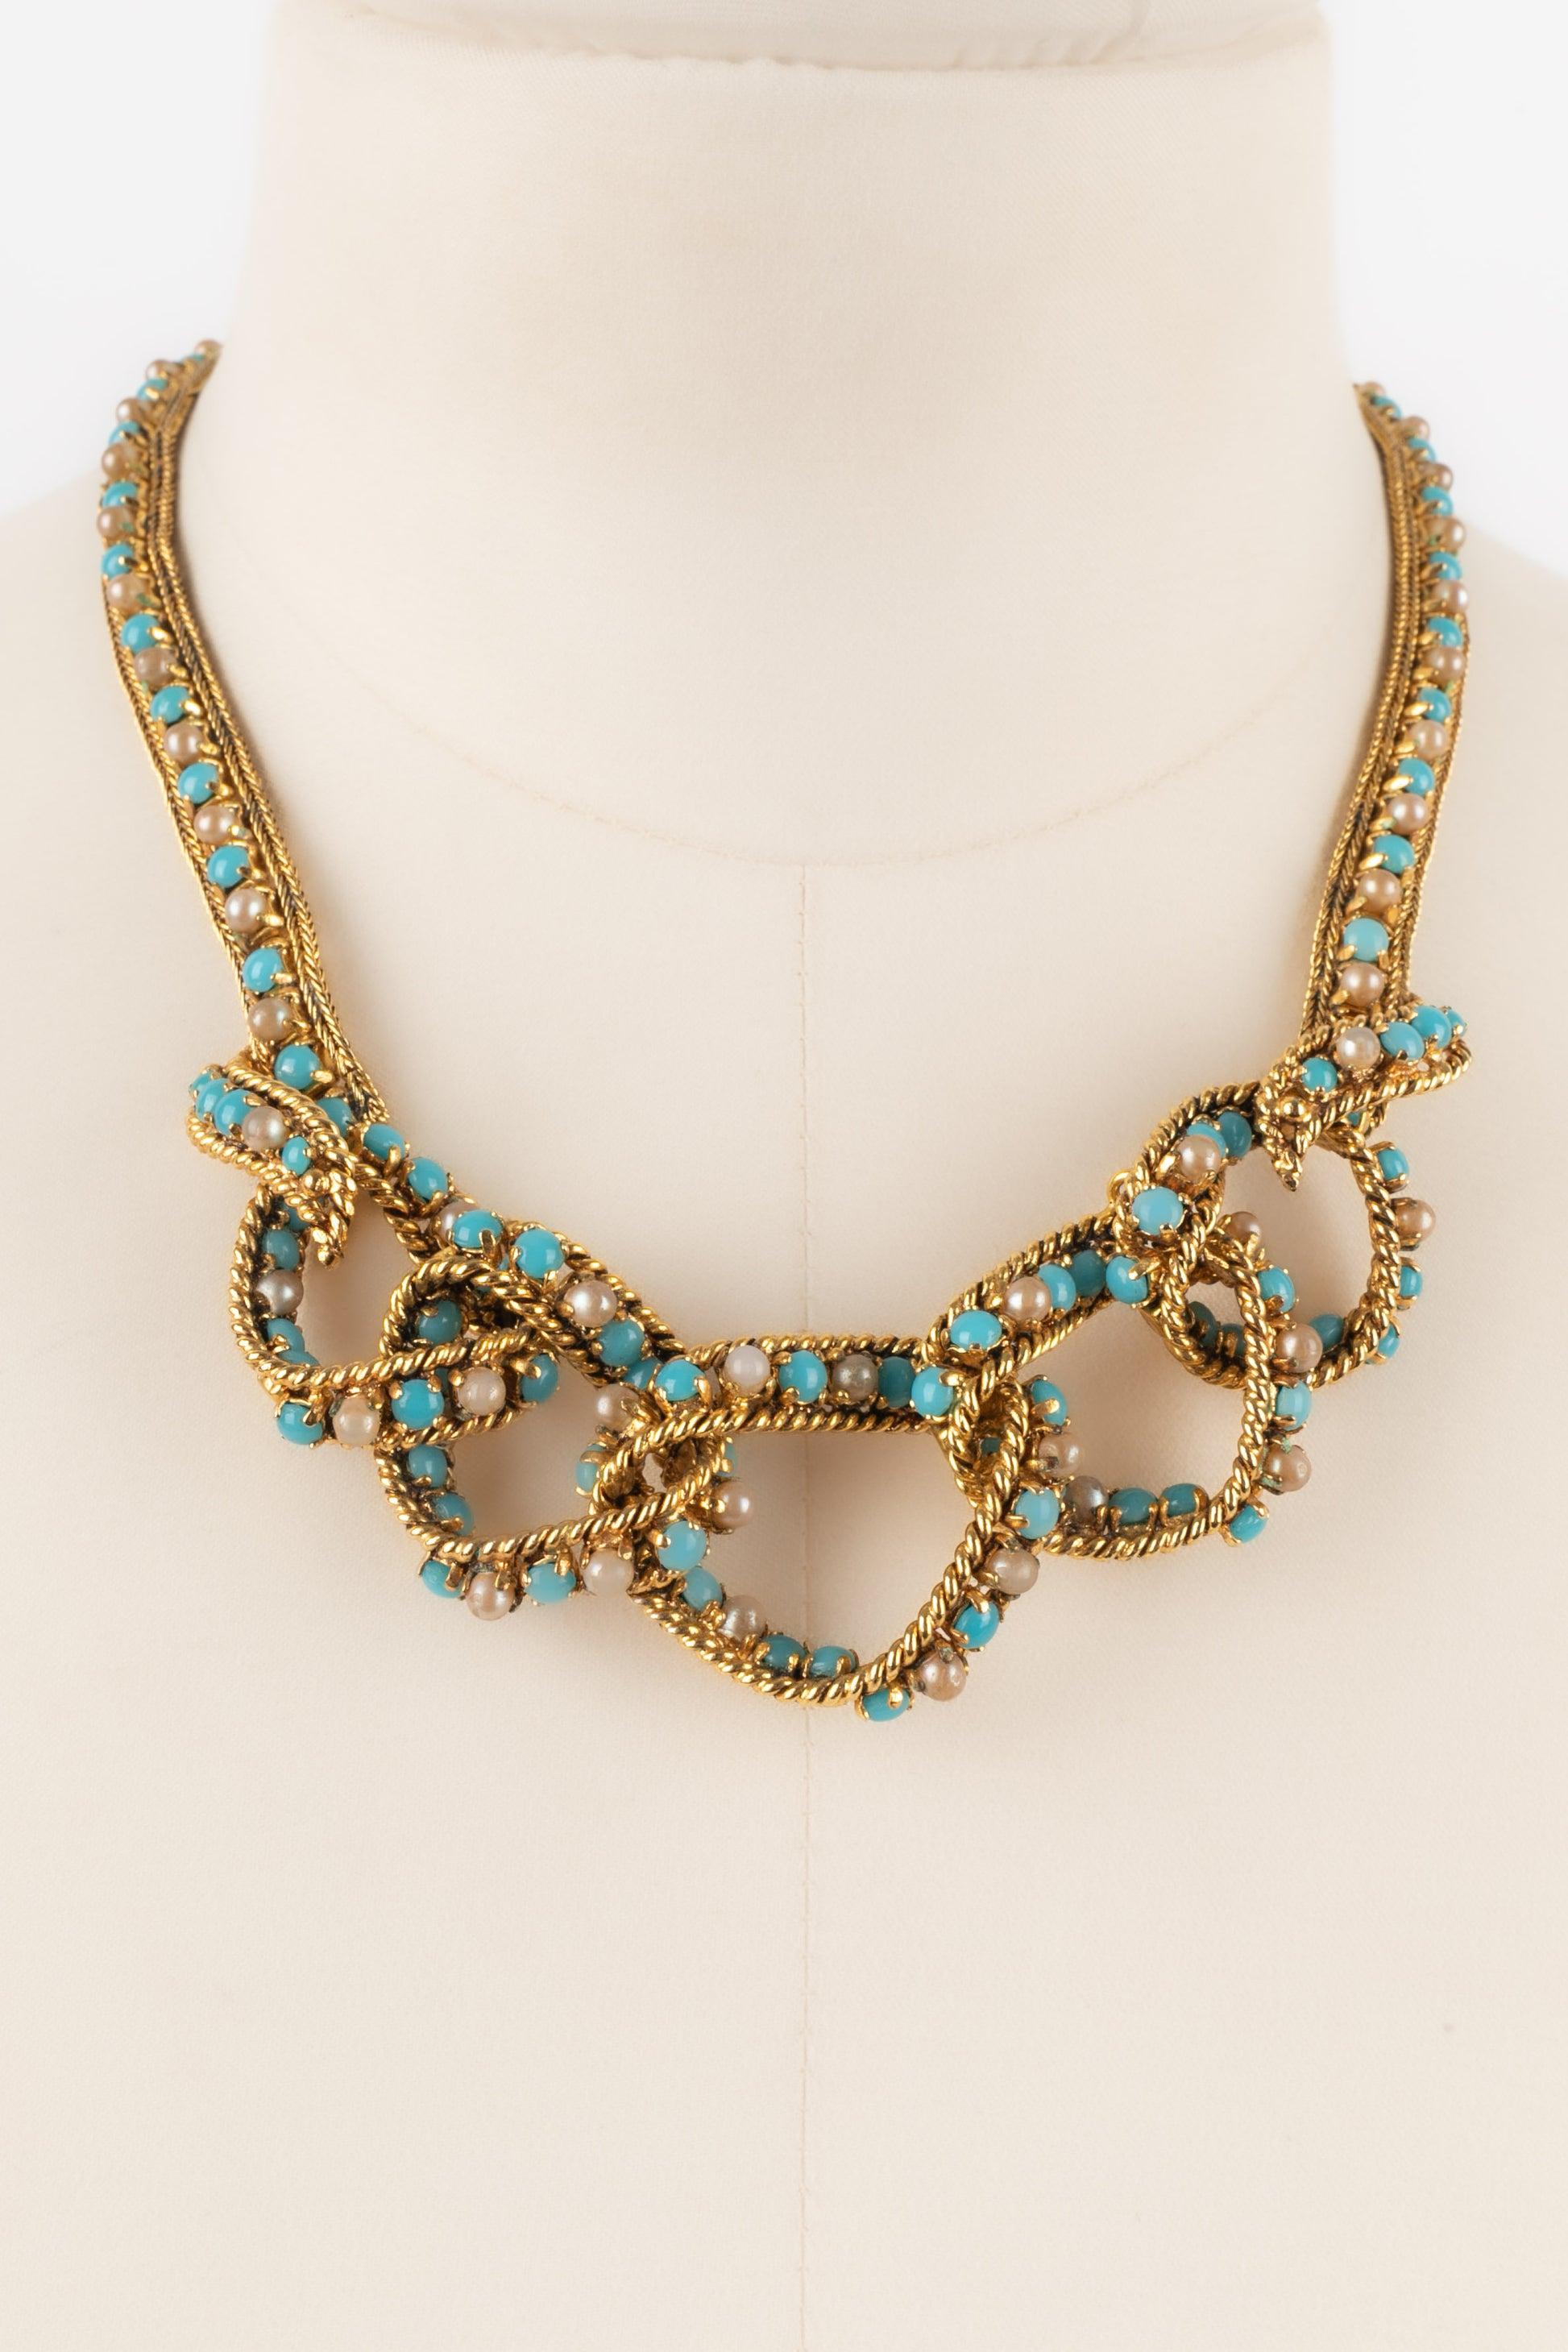 Dior Golden Metal Necklace with Costume Pearly Cabochons, 1965 For Sale 5